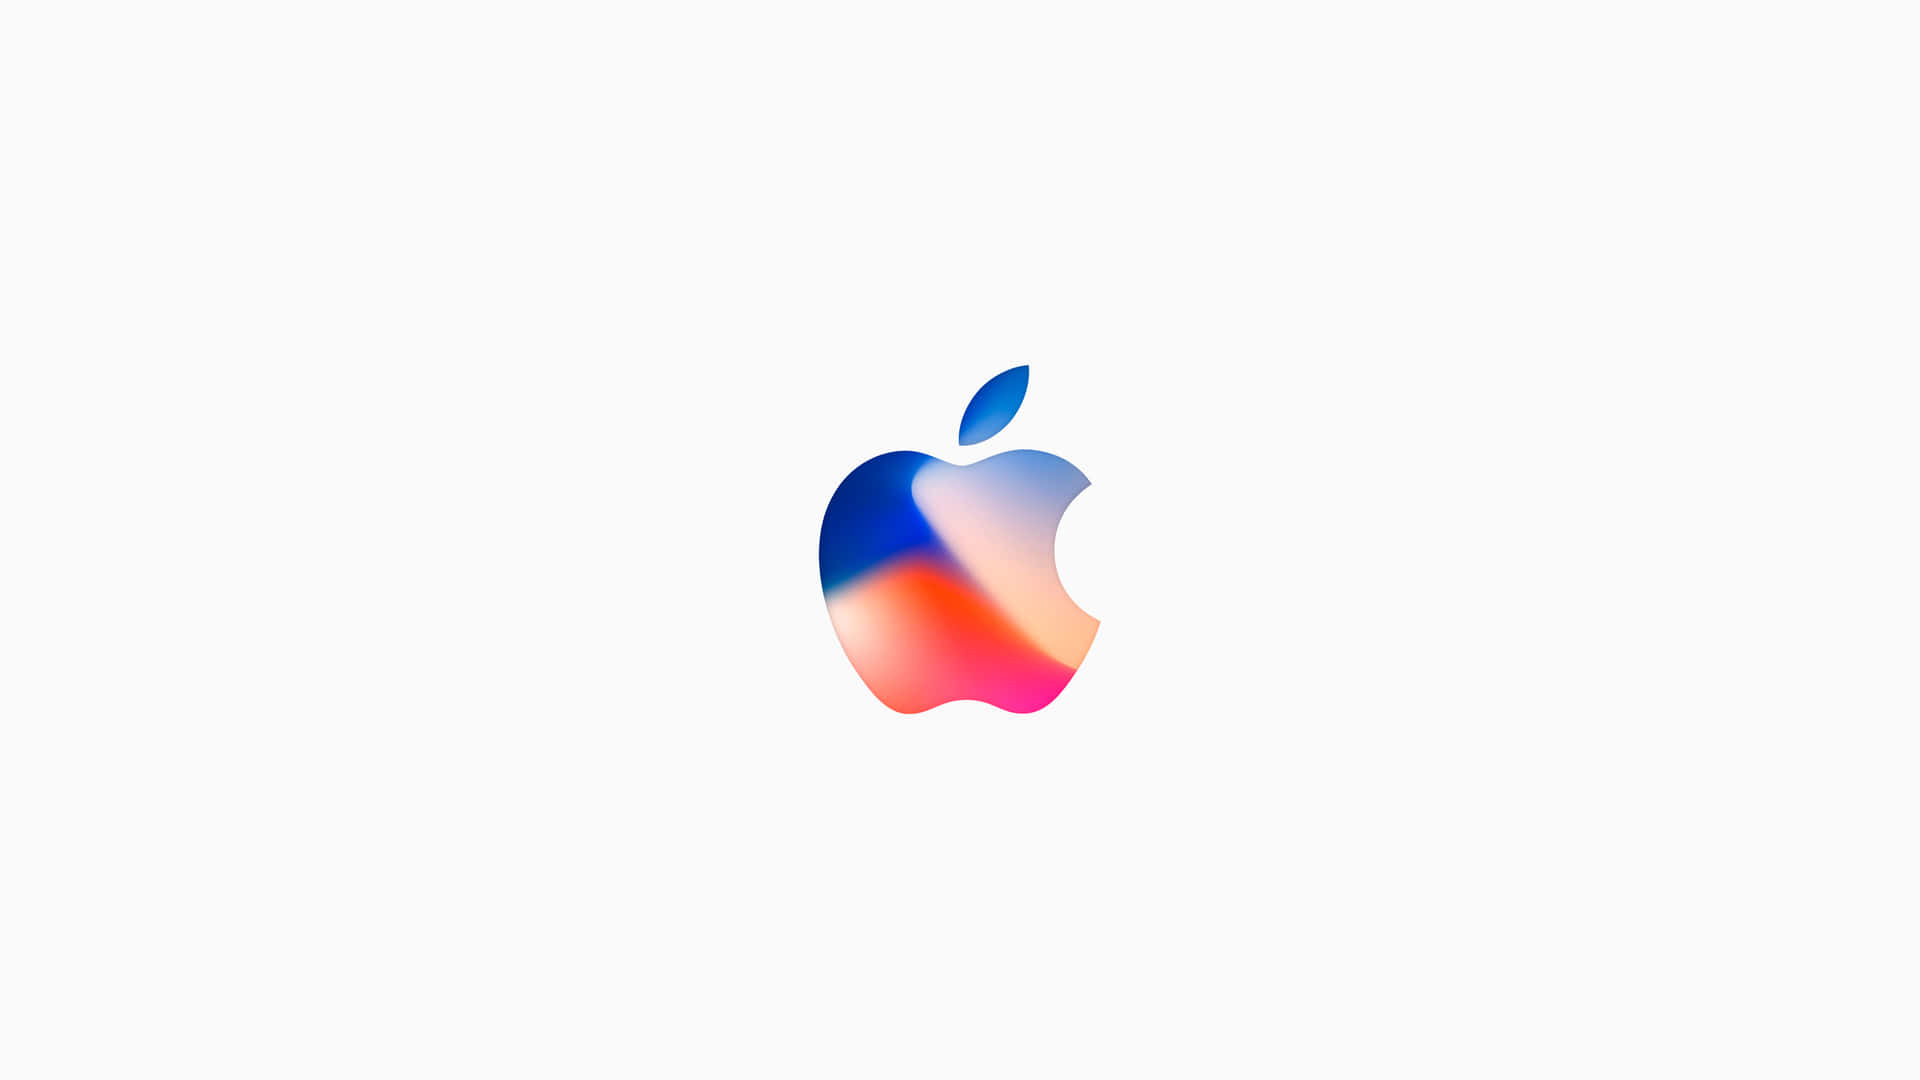 A colorful and bright Apple logo amidst vibrant background